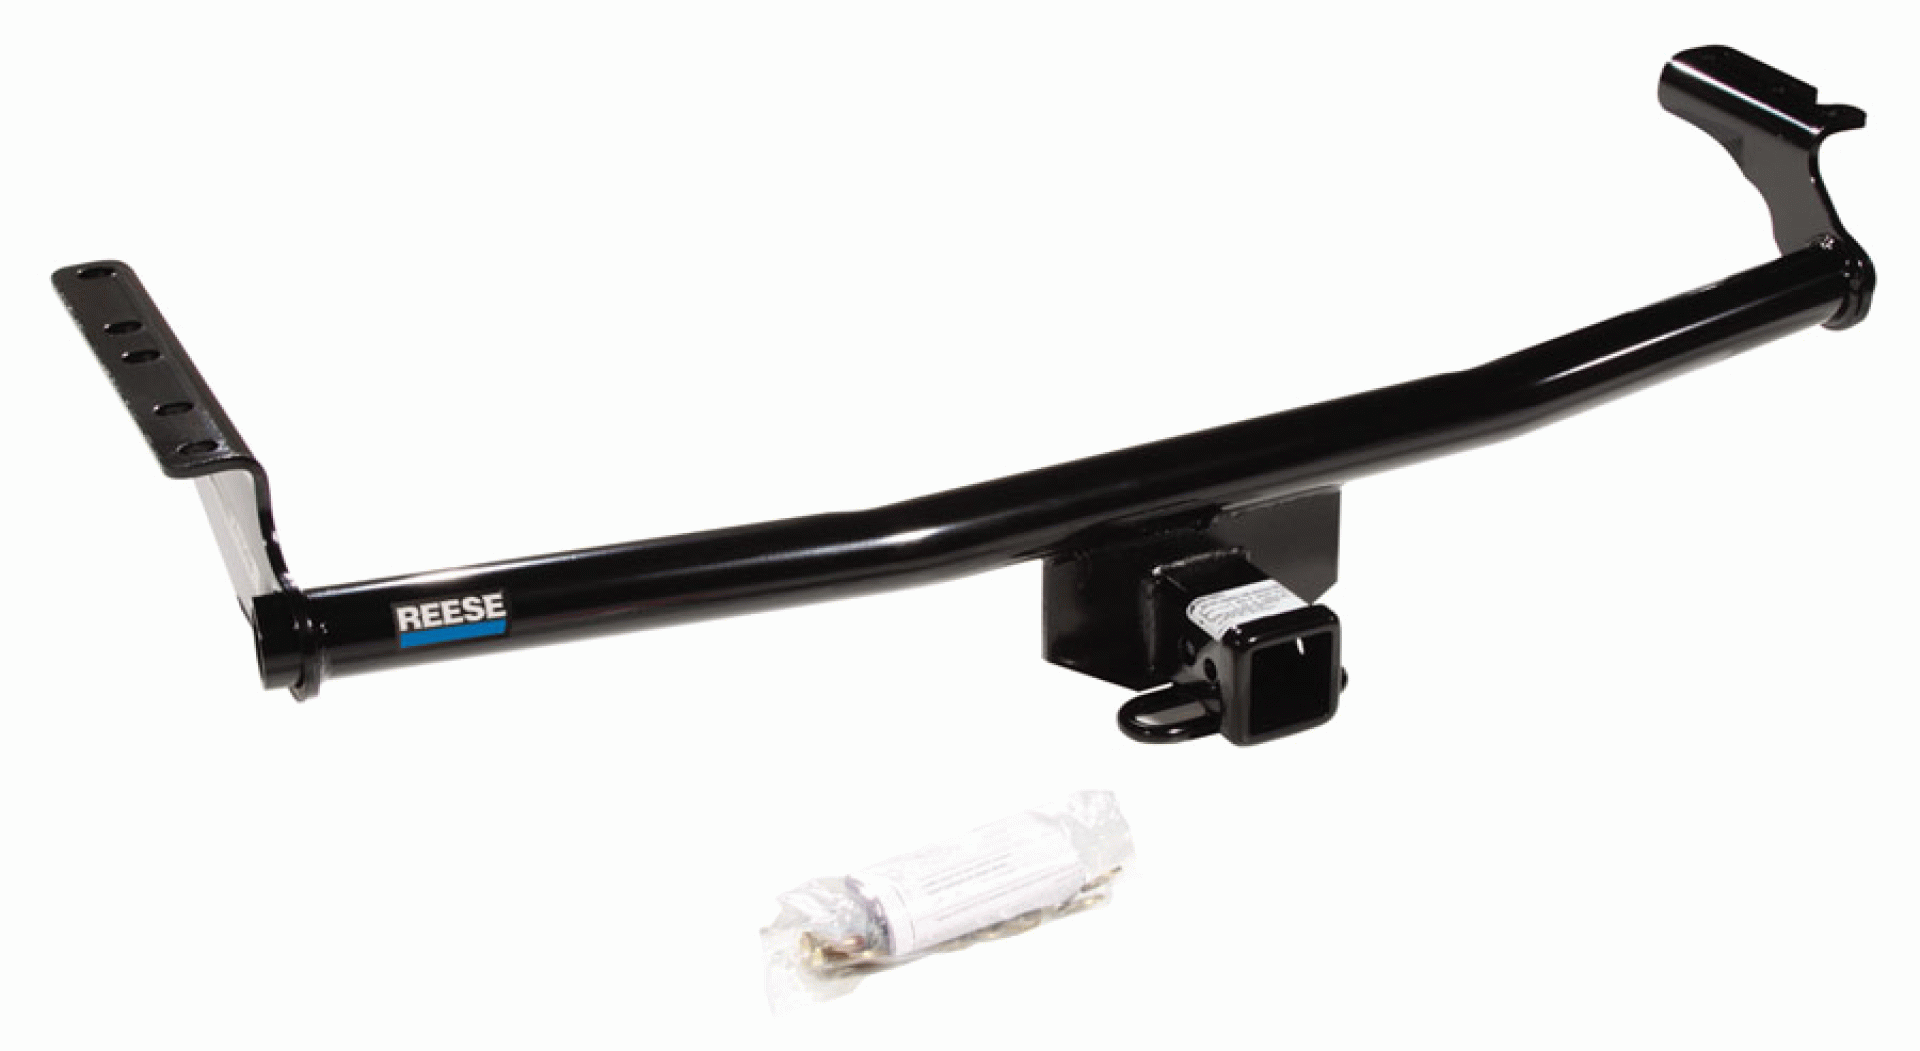 REESE | 33037 | HITCH CLASS III REQUIRES 2 INCH REMOVABLE DRAWBAR